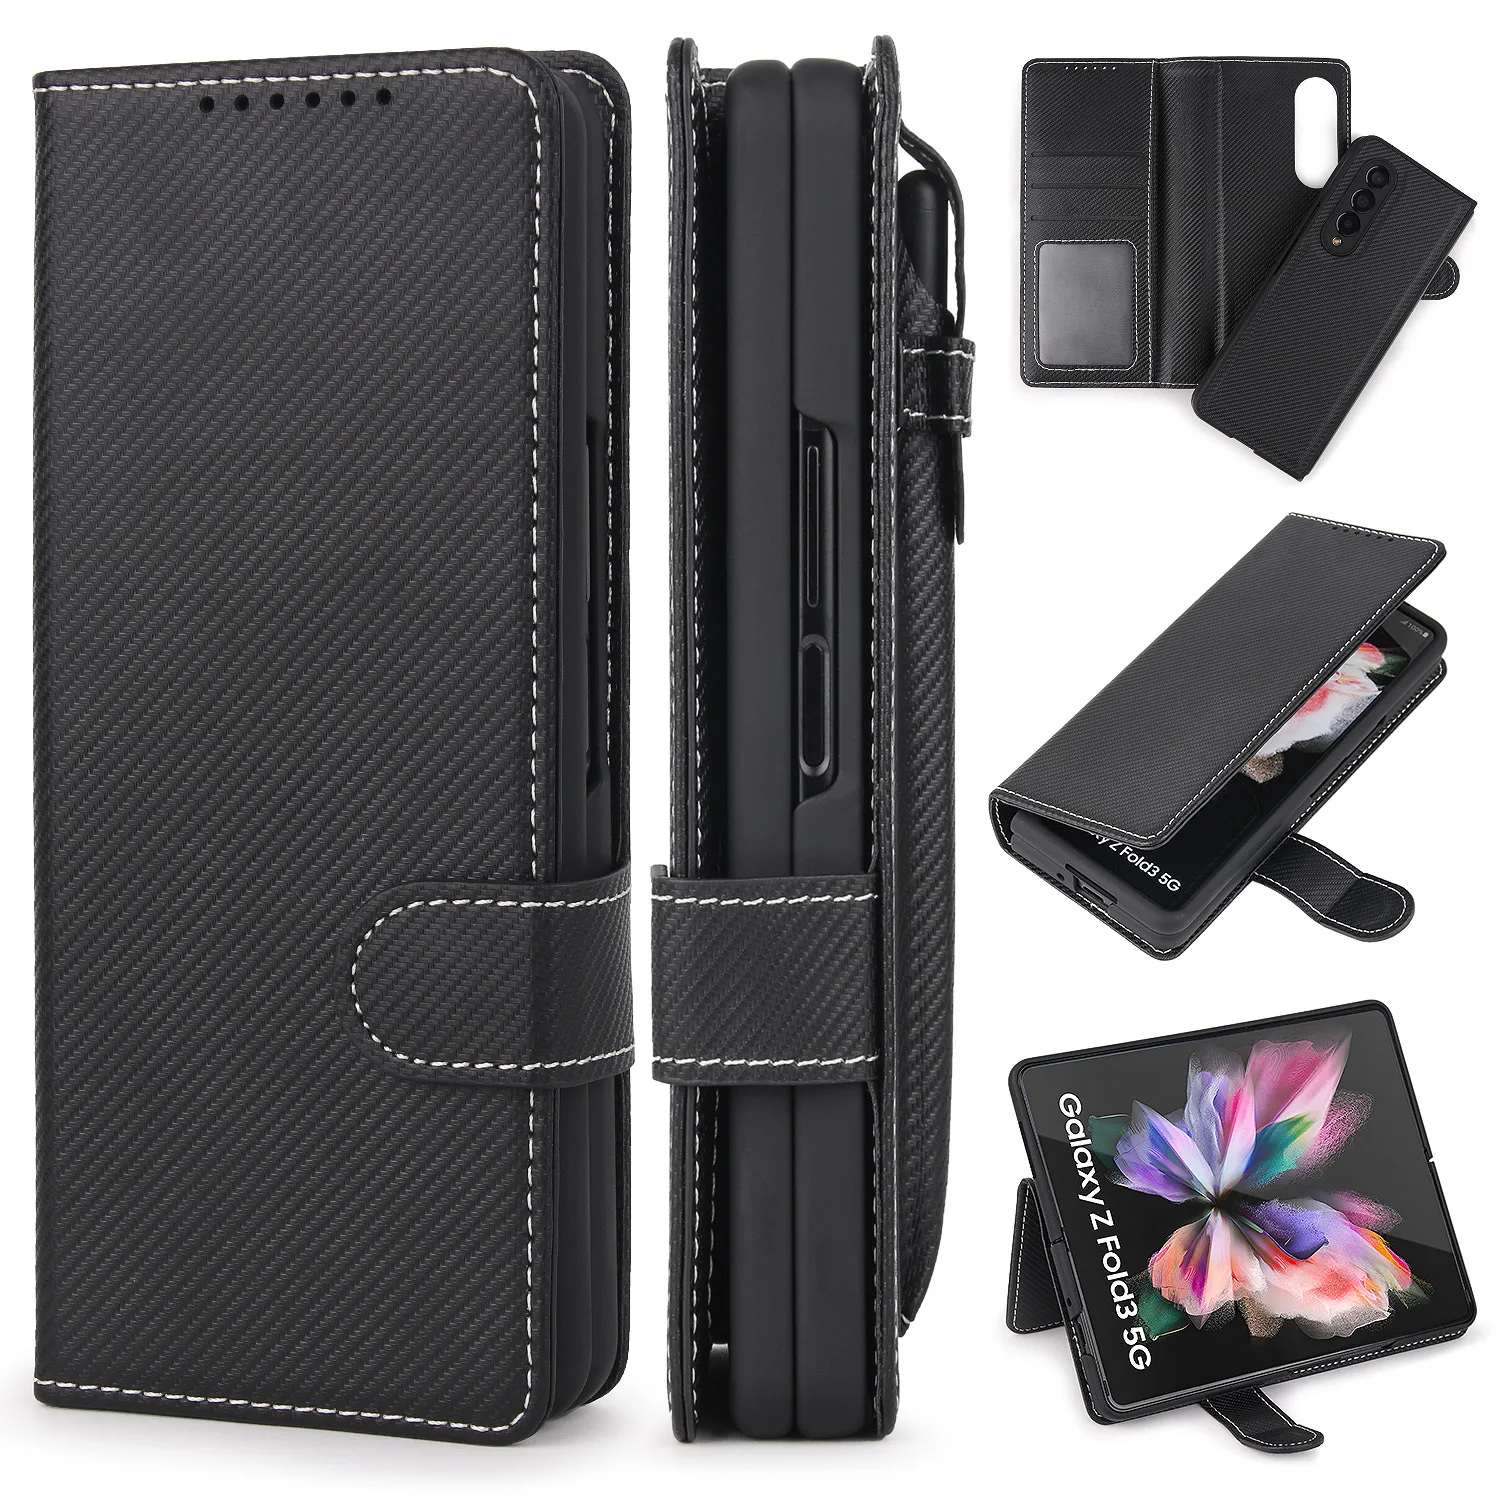 

With S Pen Slot Holder Case For Samsung Galaxy Z Fold 3 Case For F9260 Case Not Included S Pen No Spen Sell